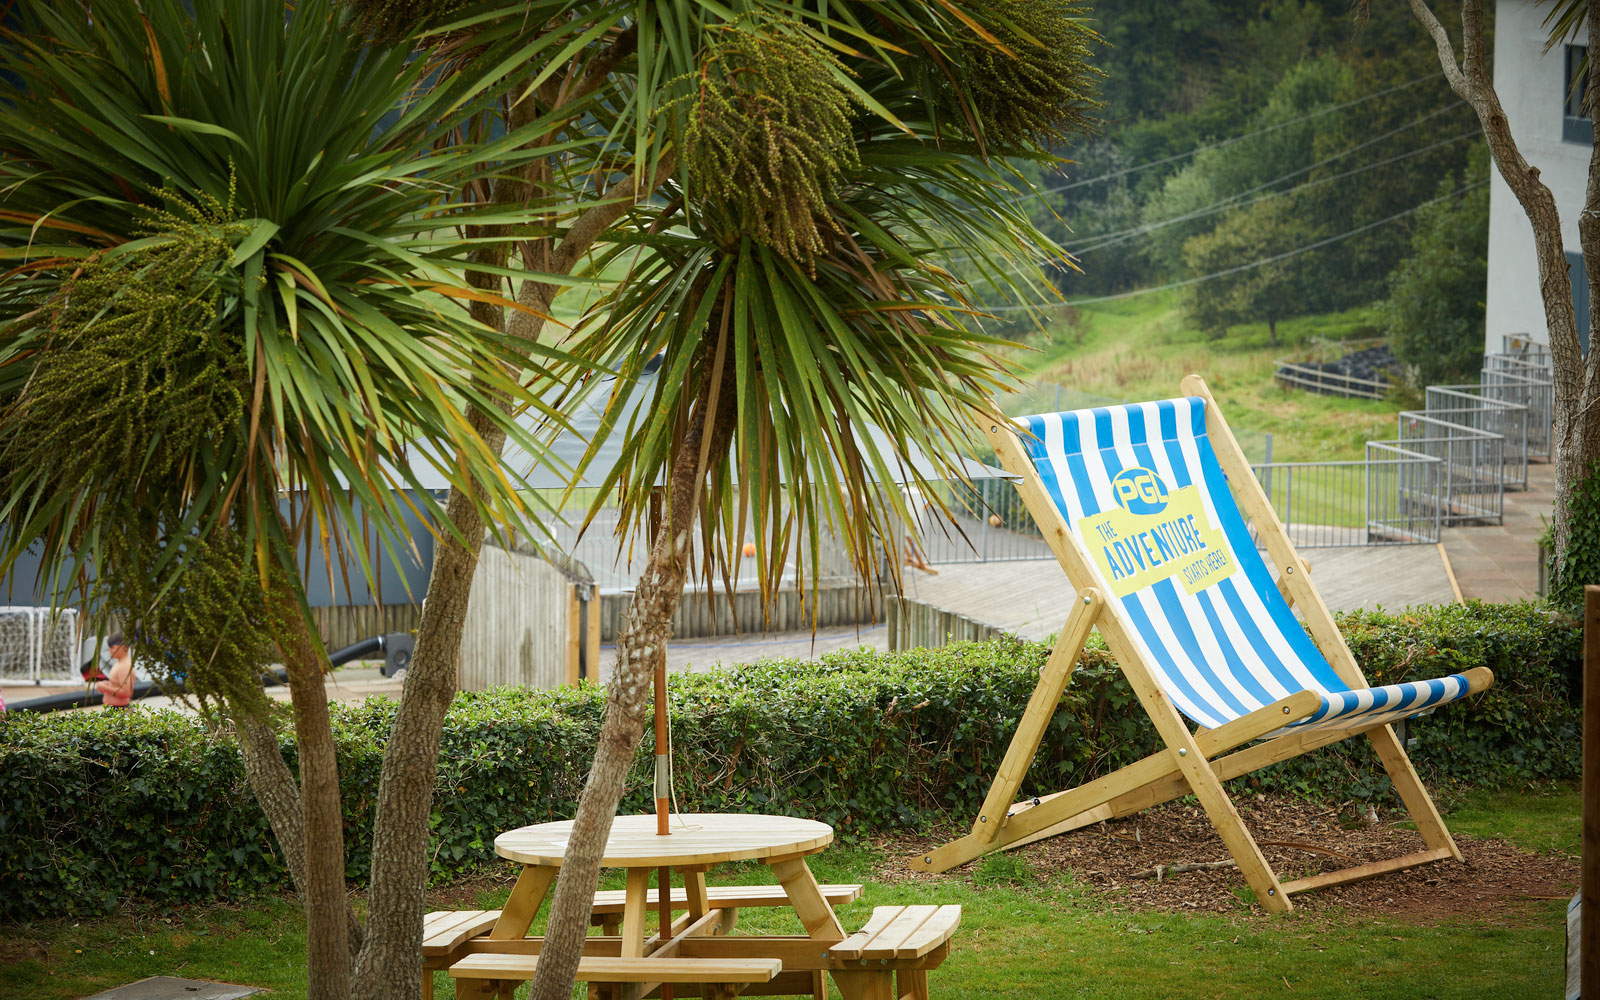 Relaxation area at PGL Barton Hall with deck chair, palm trees and picnic table